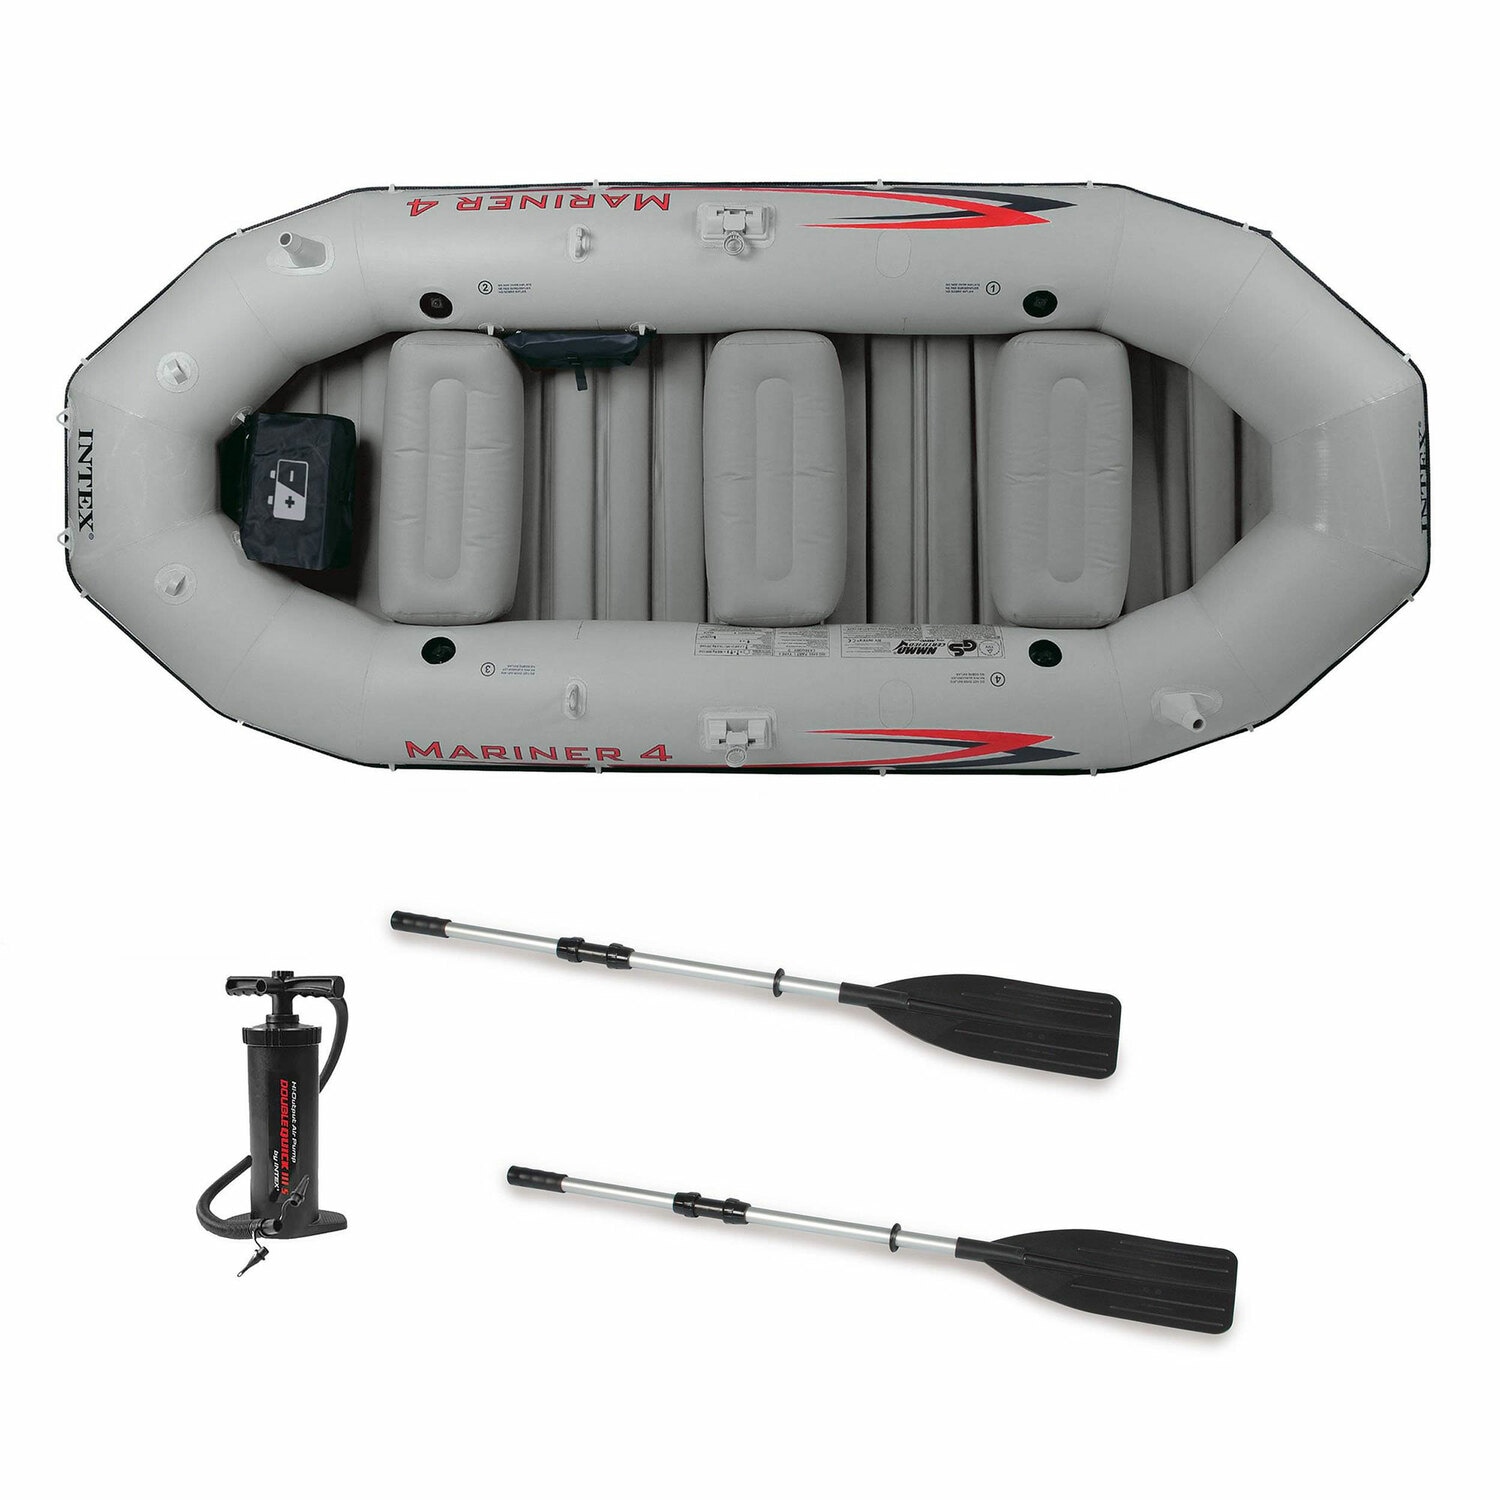 Inflatable Fishing Boats Adults 2/3/4 Person, Inflatable Boat Pool with  Oars, Inflatable Rafts Boats, Fishing Dinghy